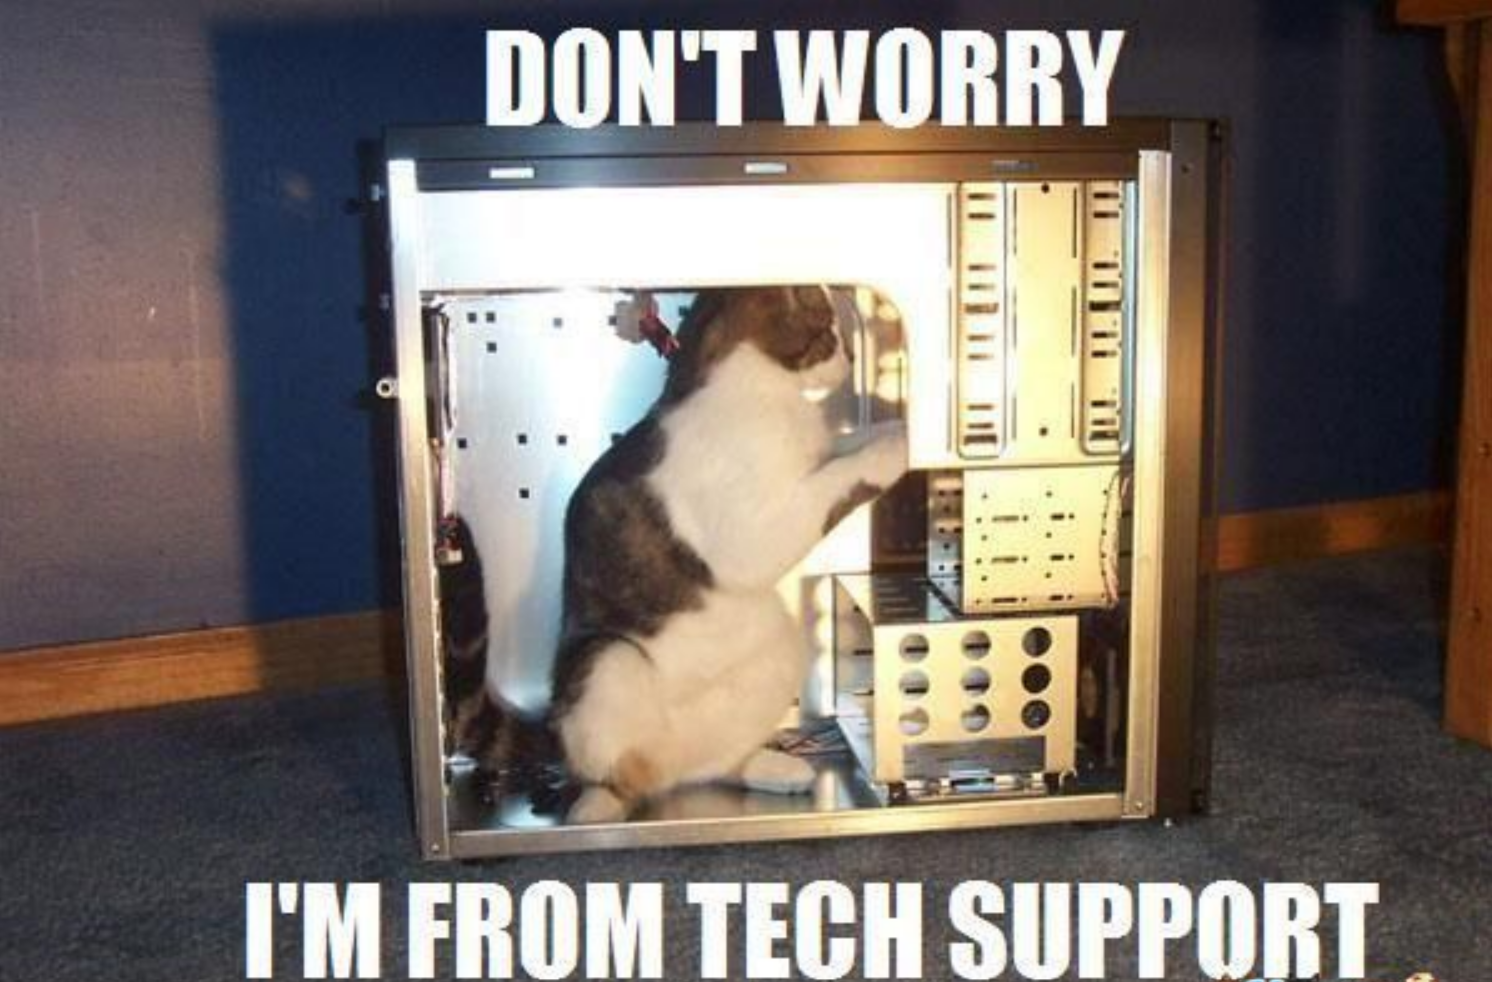 Don't worry, I'm from tech support